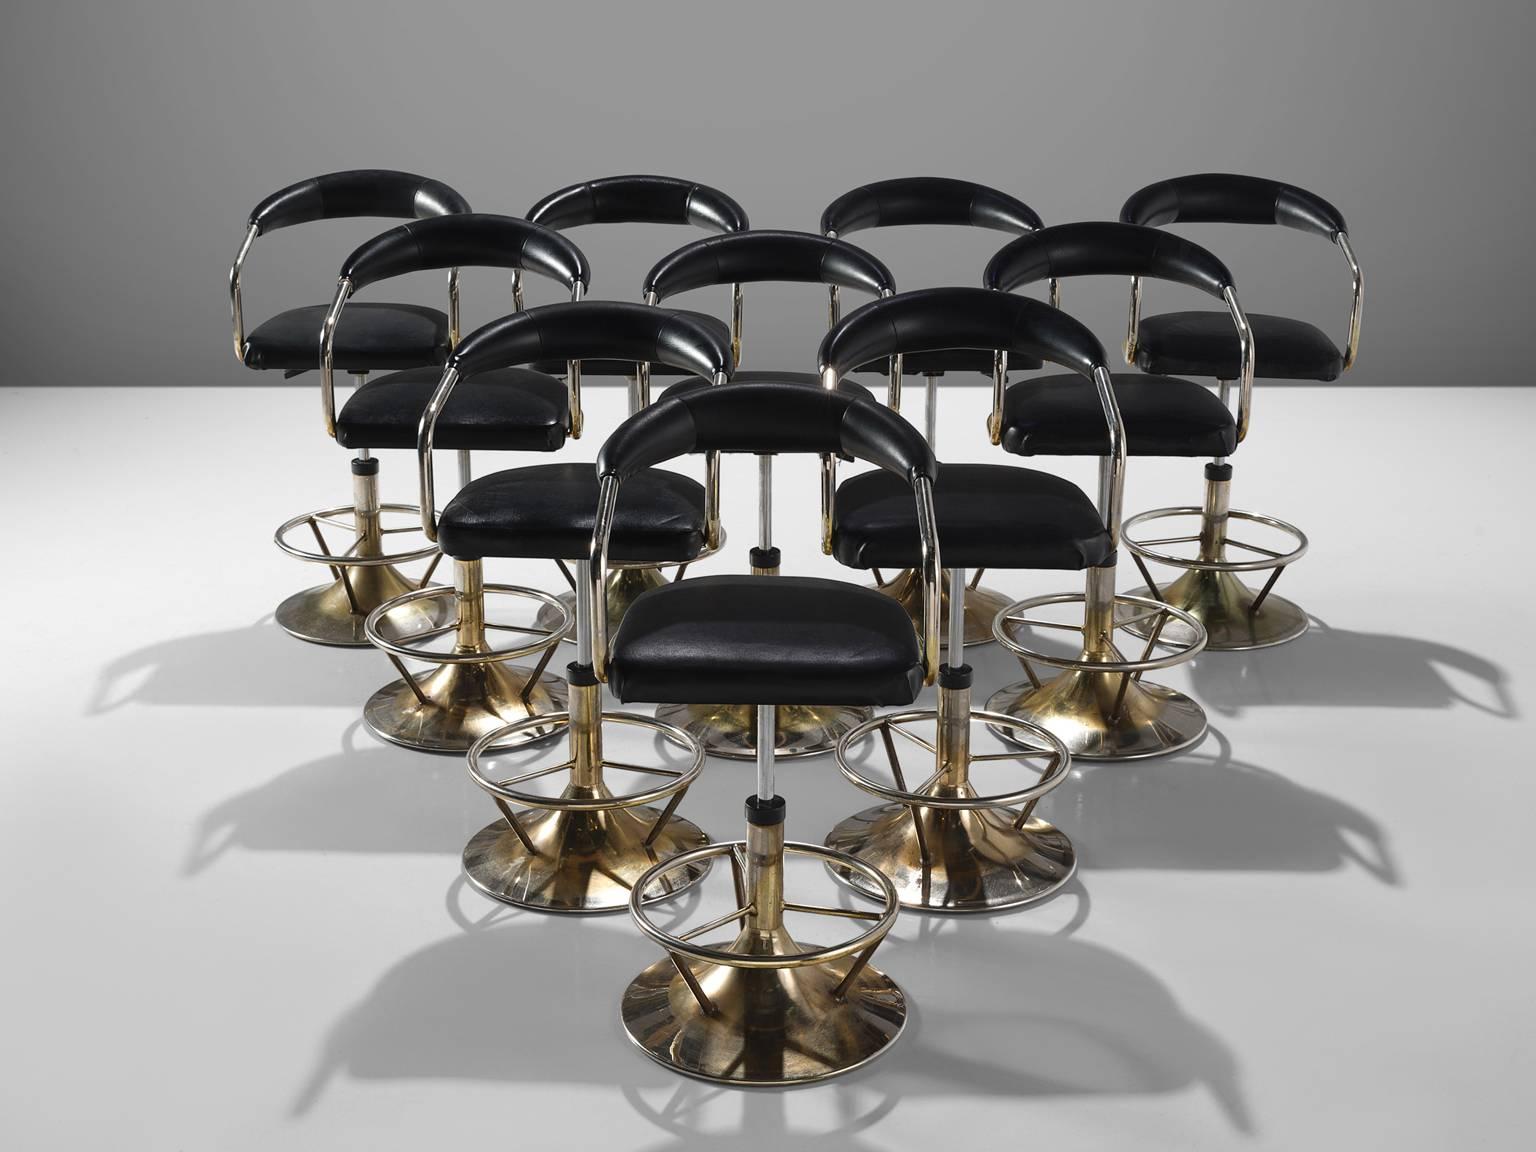 Set of ten barstools, in brass colored metal and black leatherette, Europe, 1970s.

Highly comfortable high barstools with backrest in black faux leather upholstery. Due to the soft seat and back, these chairs provide a high sitting comfort. The